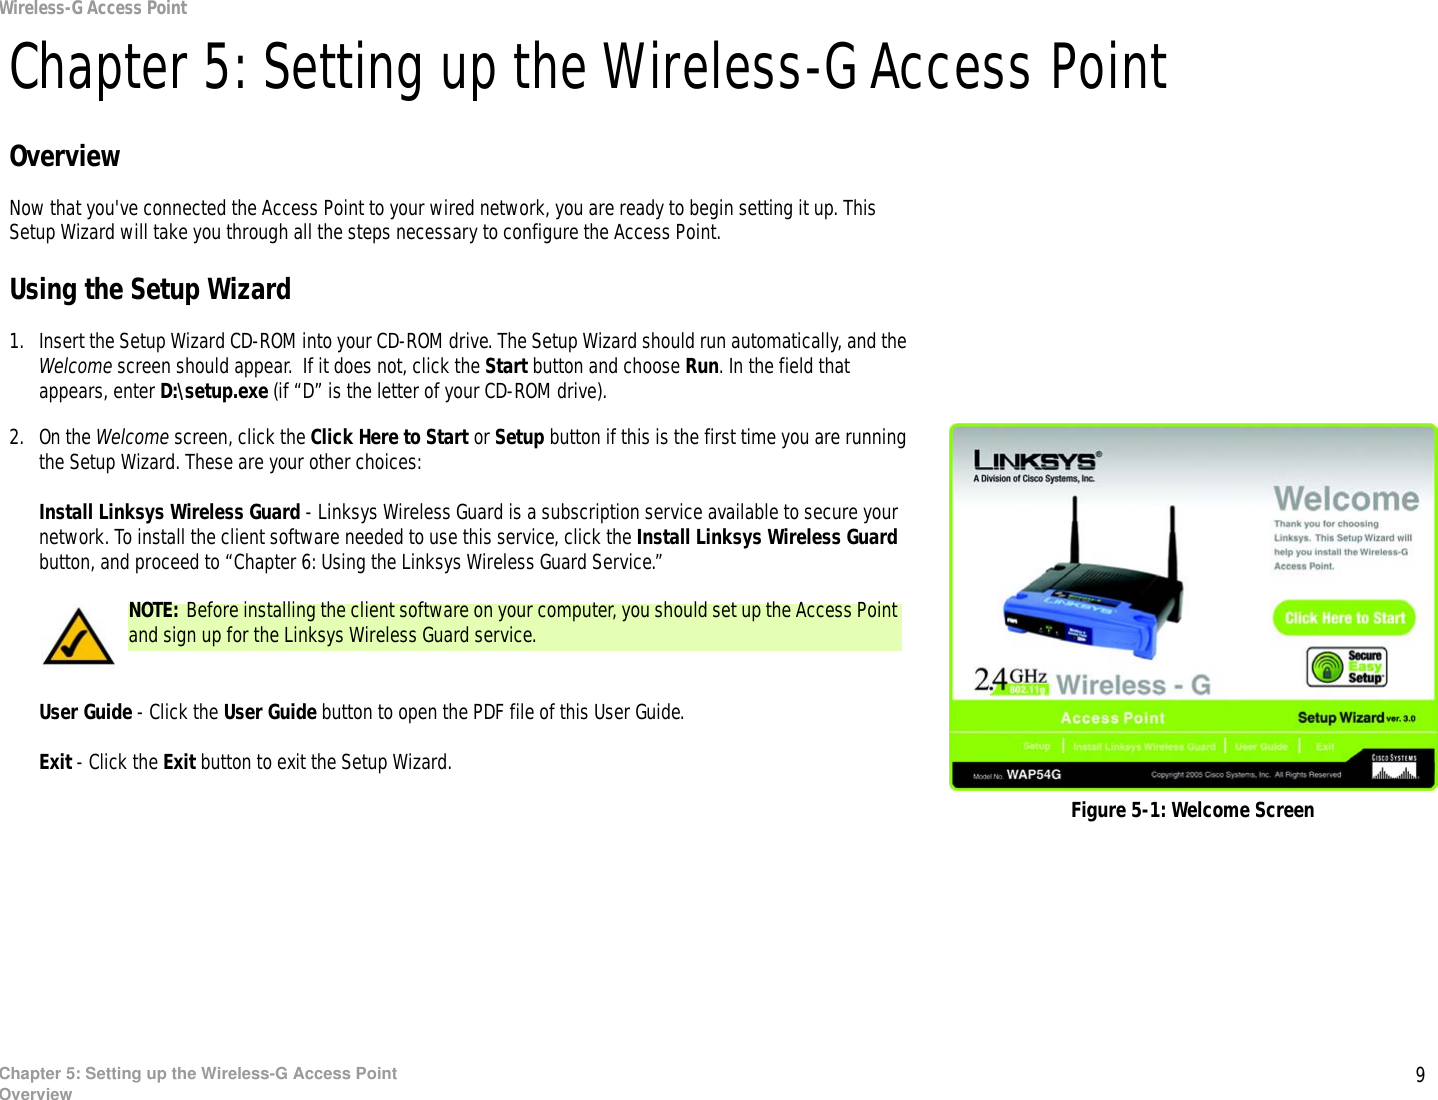 9Chapter 5: Setting up the Wireless-G Access PointOverviewWireless-G Access PointChapter 5: Setting up the Wireless-G Access PointOverviewNow that you&apos;ve connected the Access Point to your wired network, you are ready to begin setting it up. This Setup Wizard will take you through all the steps necessary to configure the Access Point.Using the Setup Wizard1. Insert the Setup Wizard CD-ROM into your CD-ROM drive. The Setup Wizard should run automatically, and the Welcome screen should appear.  If it does not, click the Start button and choose Run. In the field that appears, enter D:\setup.exe (if “D” is the letter of your CD-ROM drive).2. On the Welcome screen, click the Click Here to Start or Setup button if this is the first time you are running the Setup Wizard. These are your other choices:Install Linksys Wireless Guard - Linksys Wireless Guard is a subscription service available to secure your network. To install the client software needed to use this service, click the Install Linksys Wireless Guard button, and proceed to “Chapter 6: Using the Linksys Wireless Guard Service.” User Guide - Click the User Guide button to open the PDF file of this User Guide.Exit - Click the Exit button to exit the Setup Wizard.Figure 5-1: Welcome ScreenNOTE: Before installing the client software on your computer, you should set up the Access Point and sign up for the Linksys Wireless Guard service.